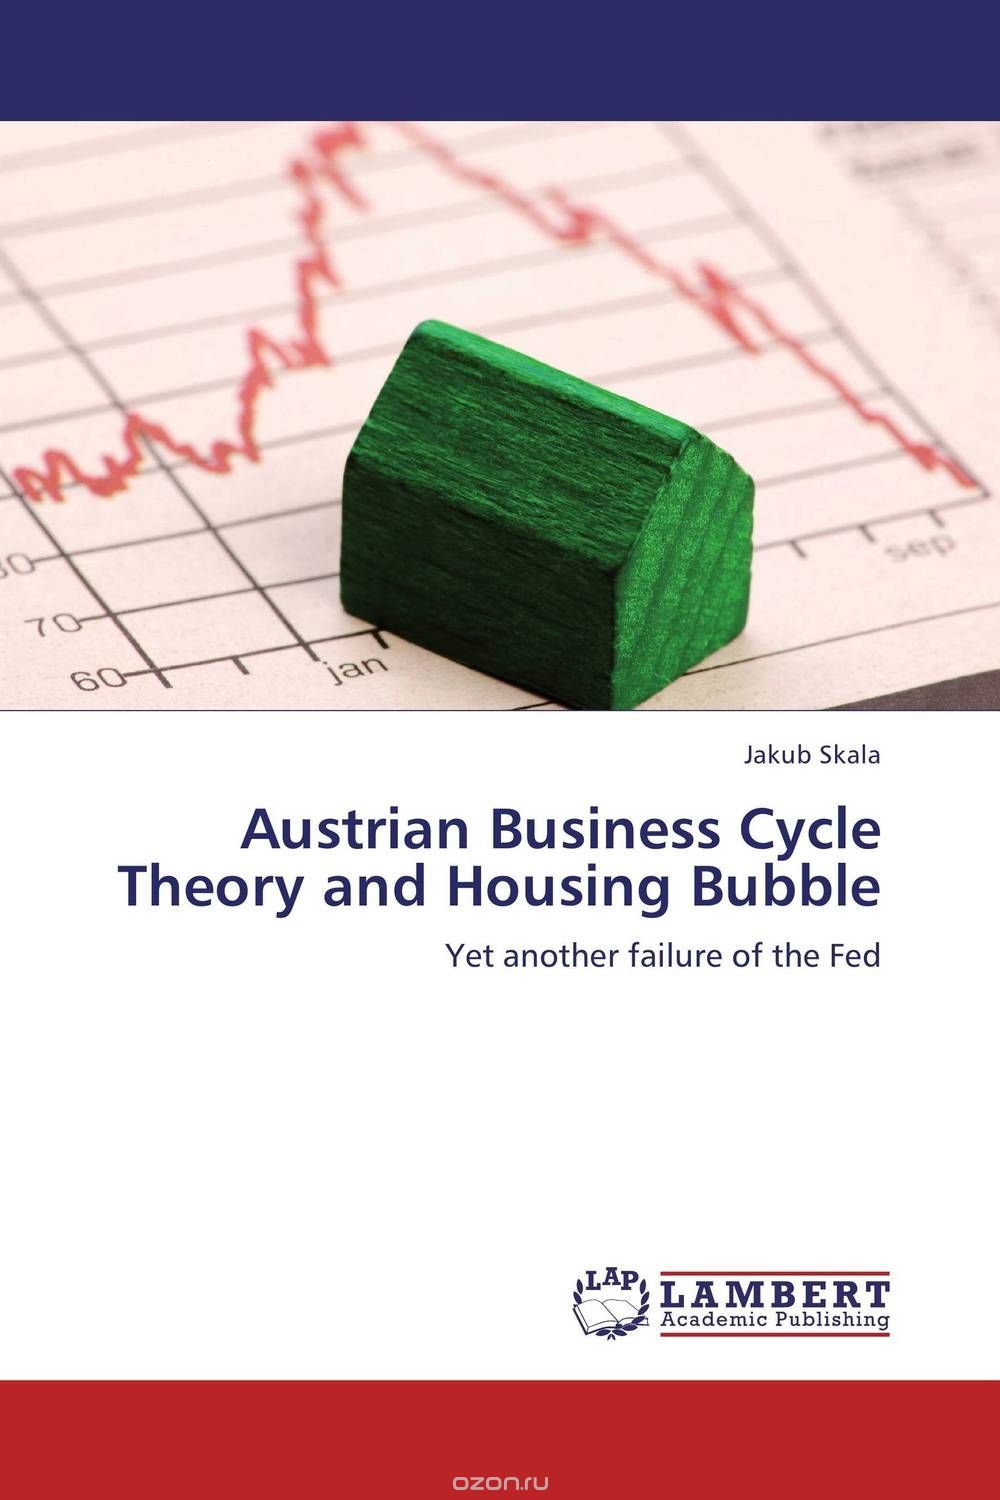 Austrian Business Cycle Theory and Housing Bubble